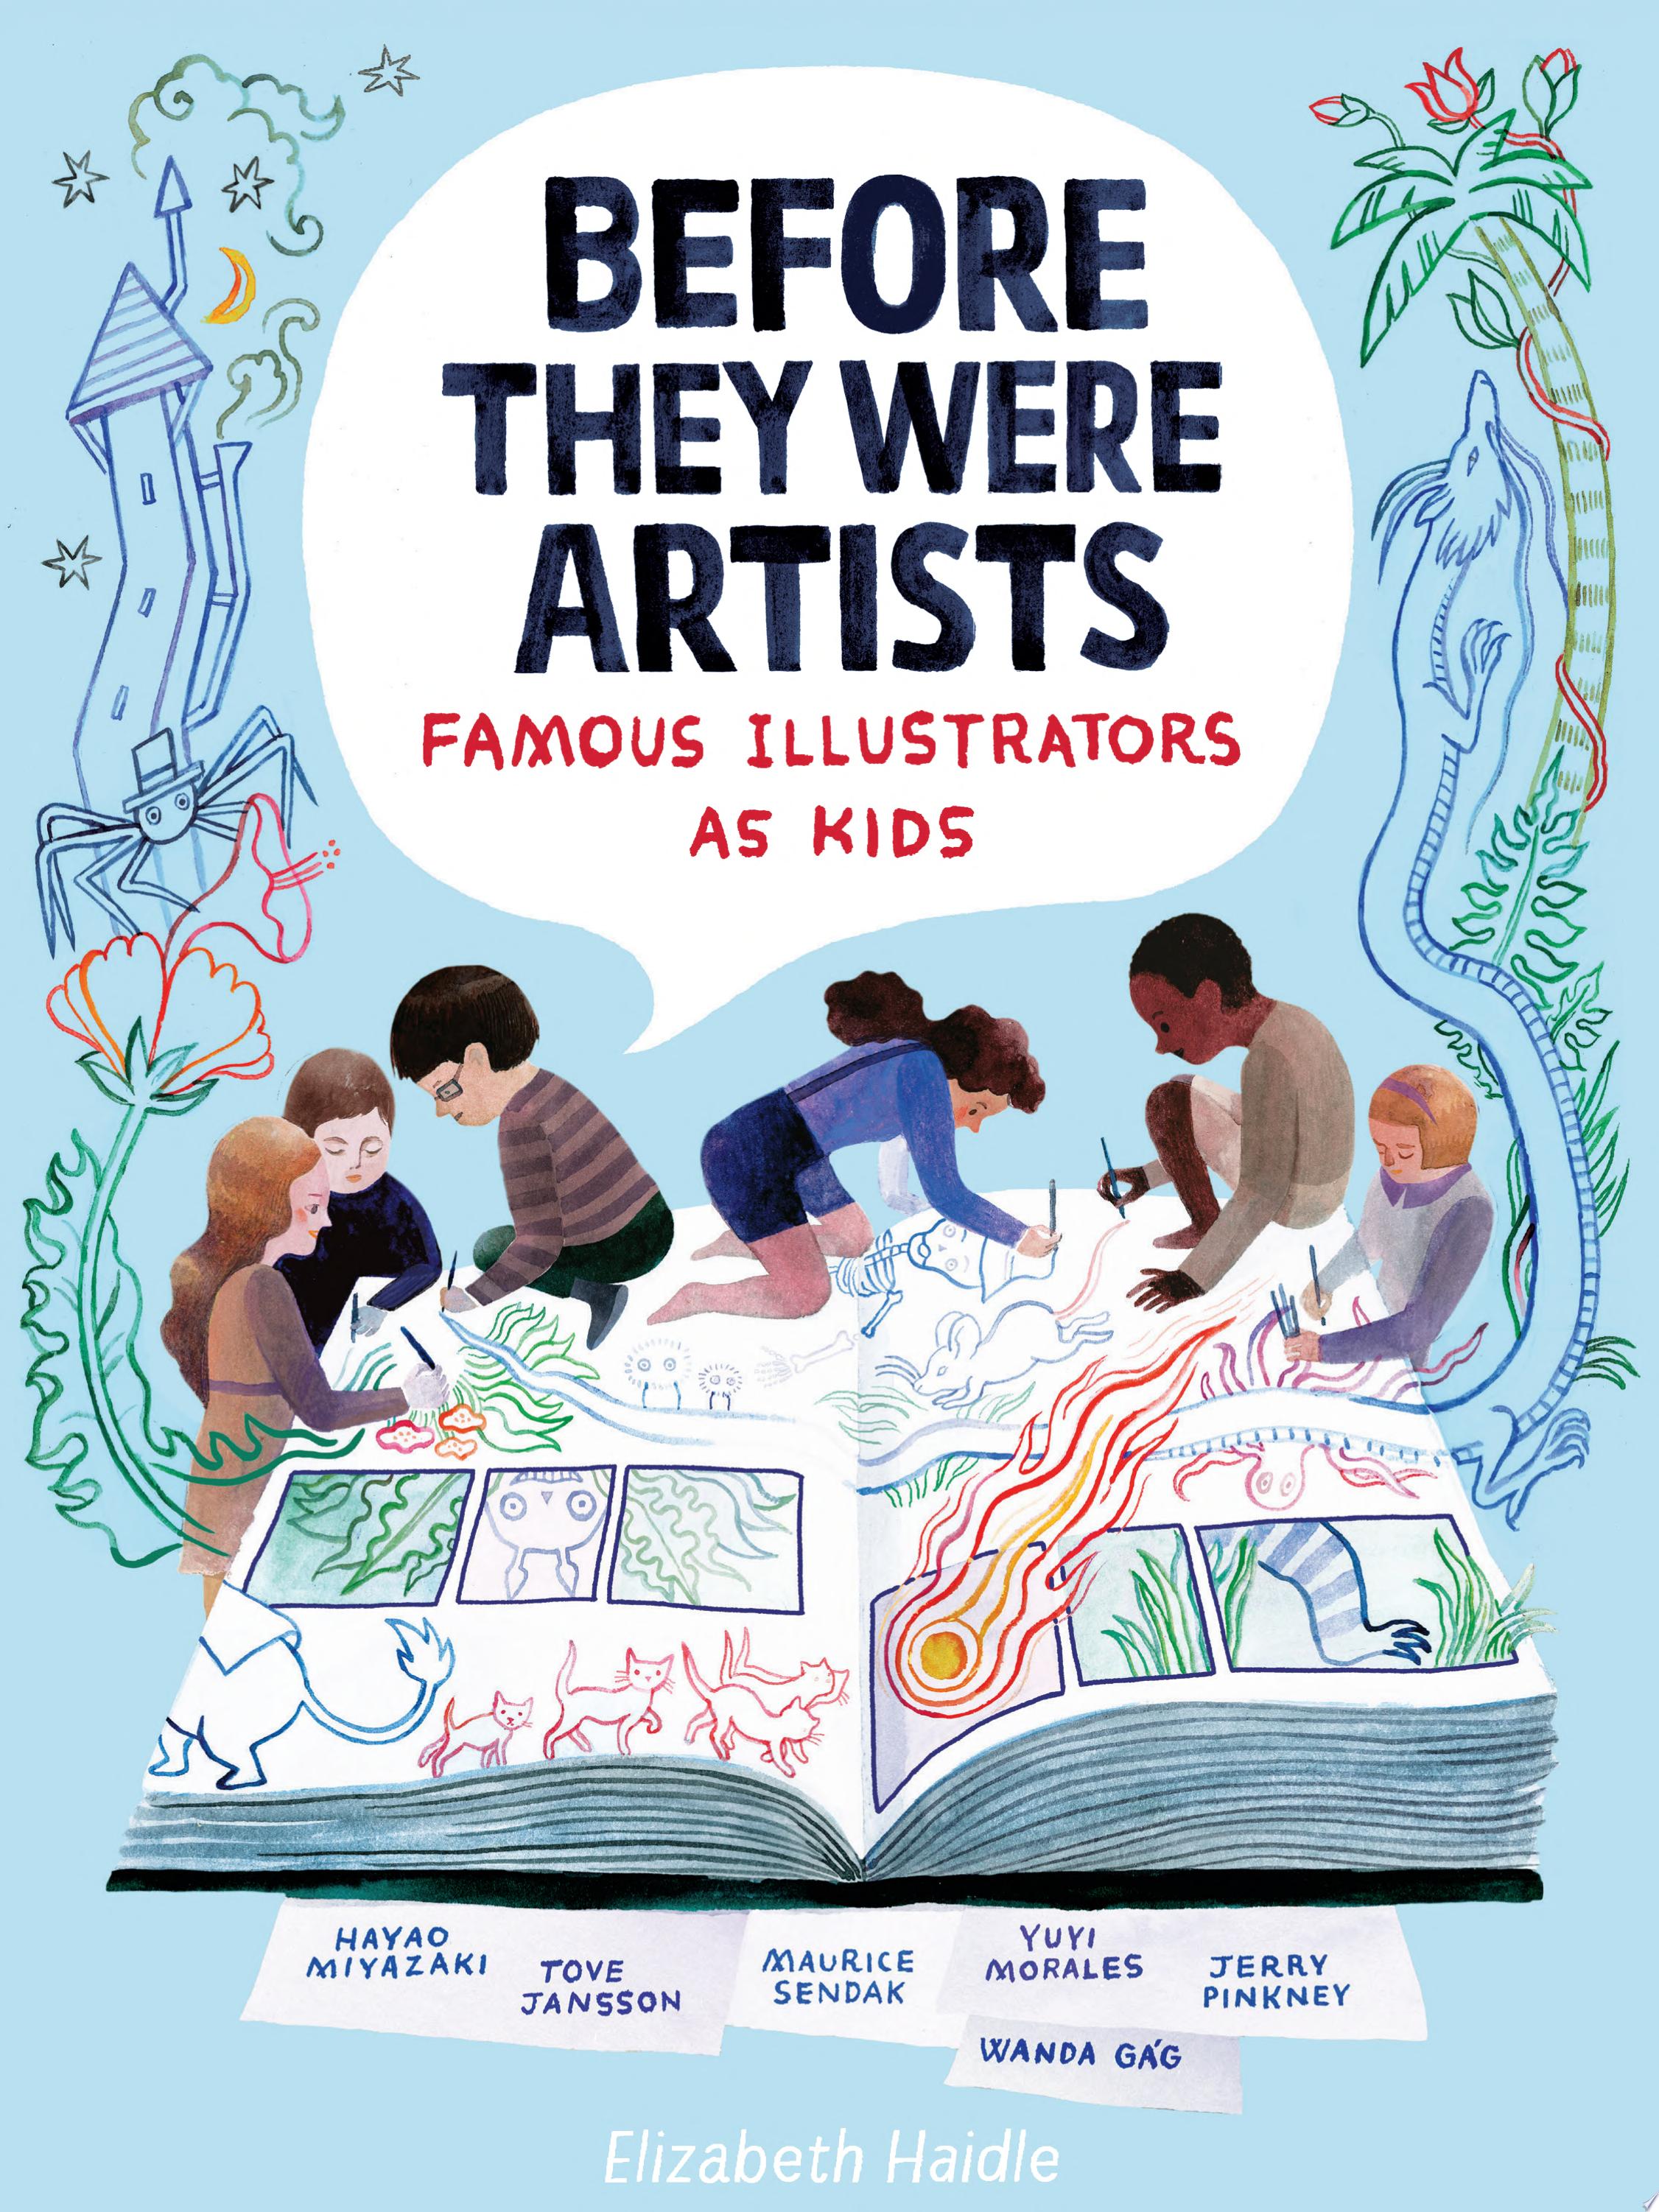 Image for "Before They Were Artists: Famous Illustrators as Kids"